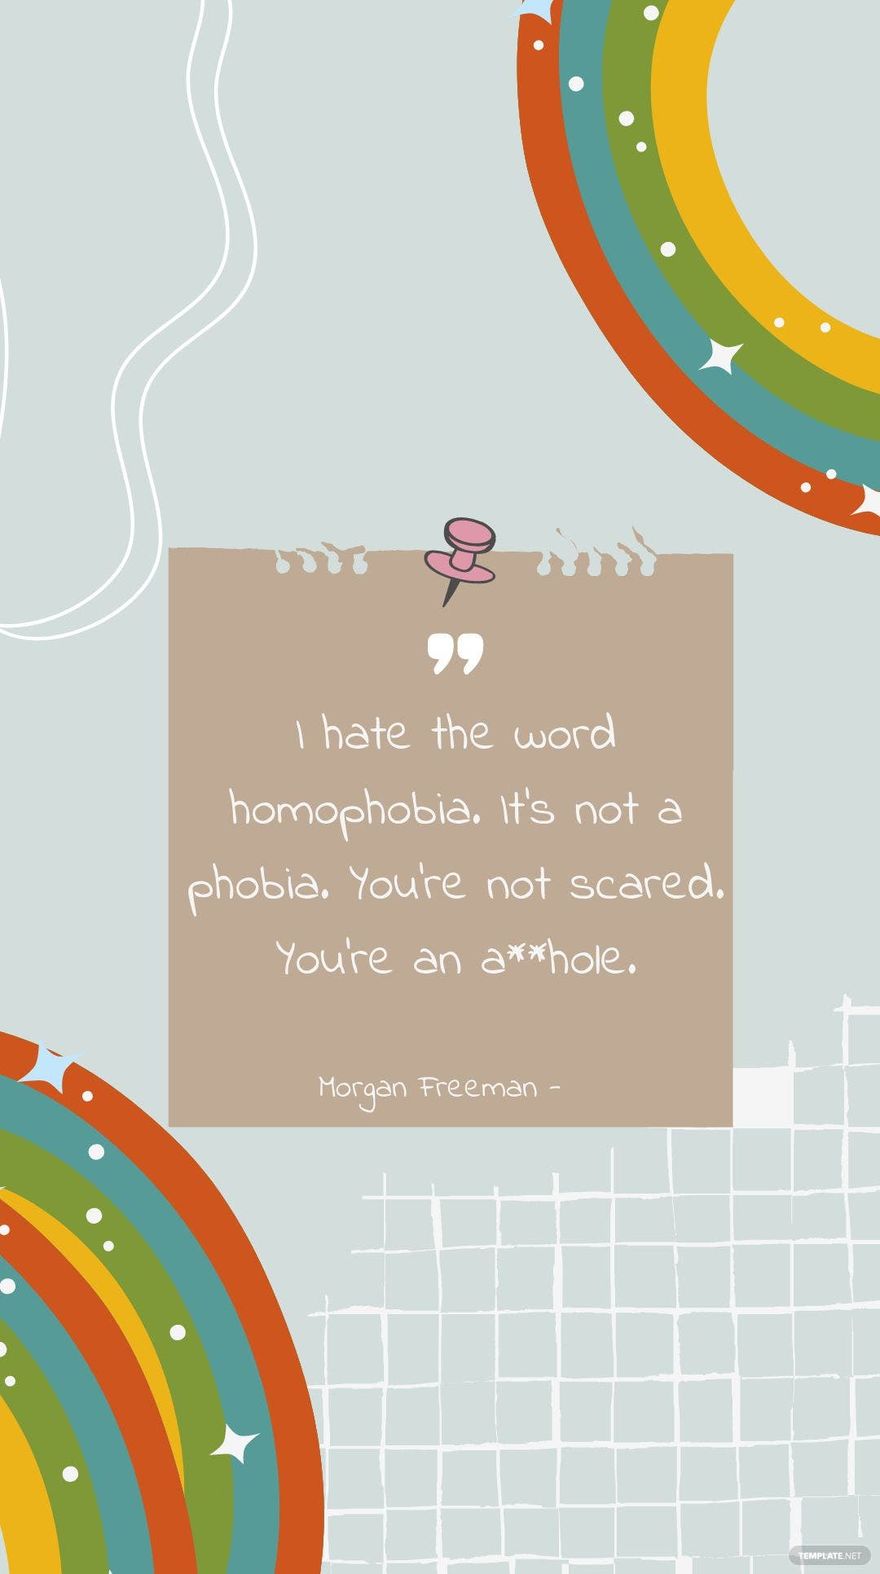 Morgan Freeman - I hate the word homophobia. It’s not a phobia. You’re not scared. You’re an a**hole. in JPG